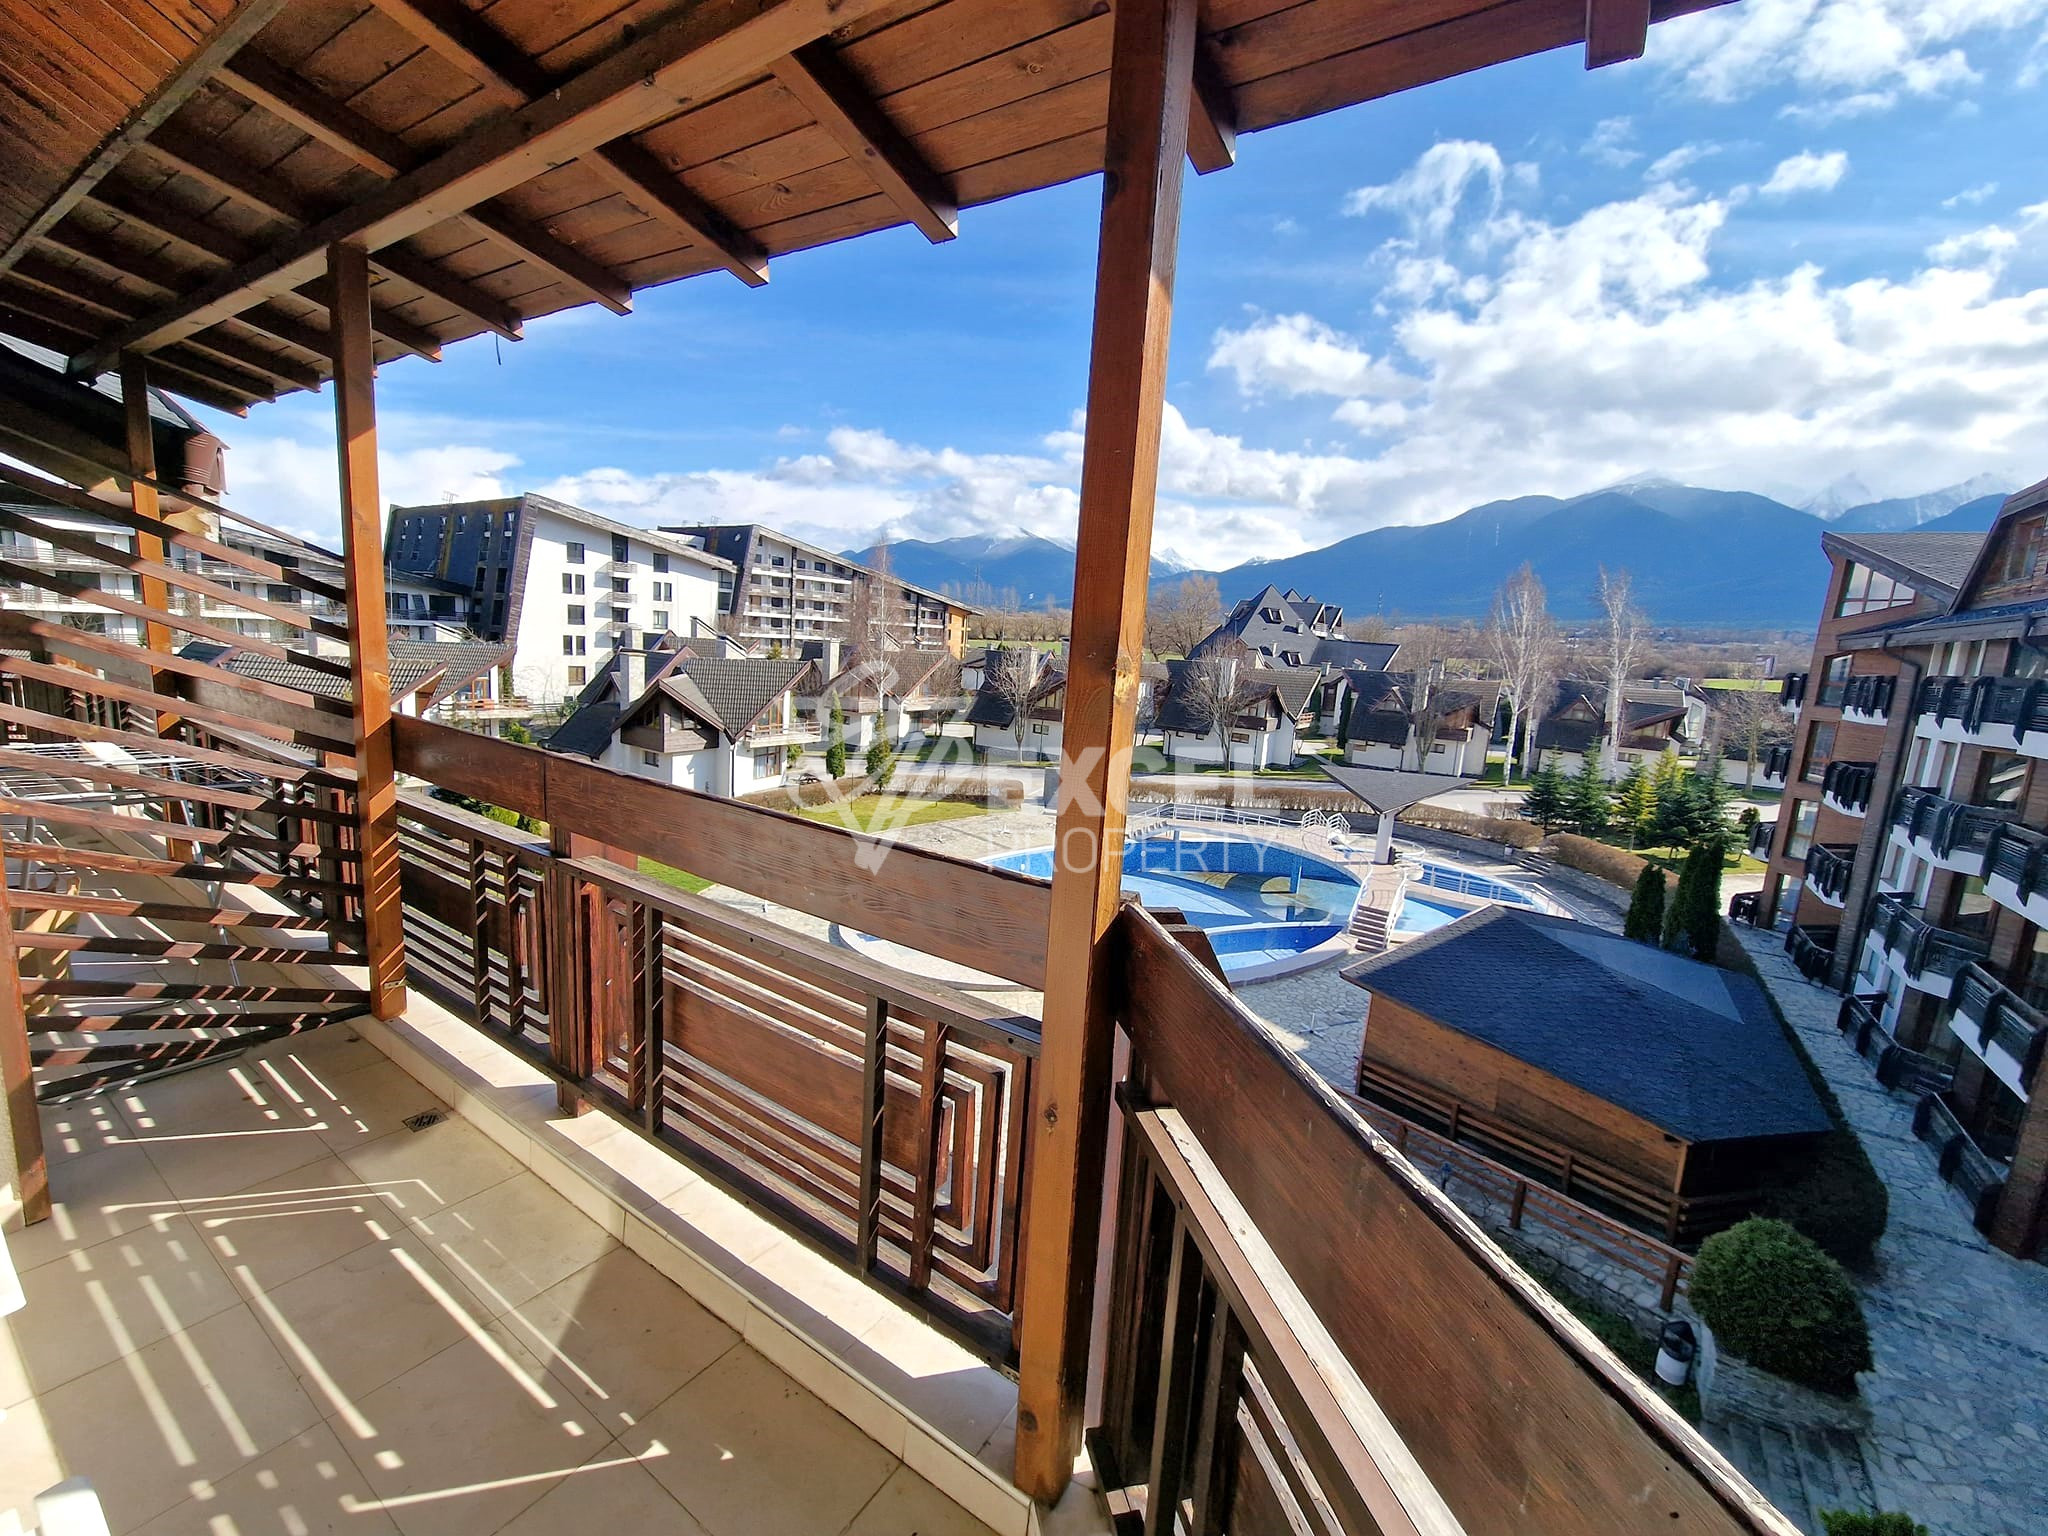 Redenka Holiday Club: one bedroom apartment with south exposure and beautiful mountain view for sale near Bansko and Razlog